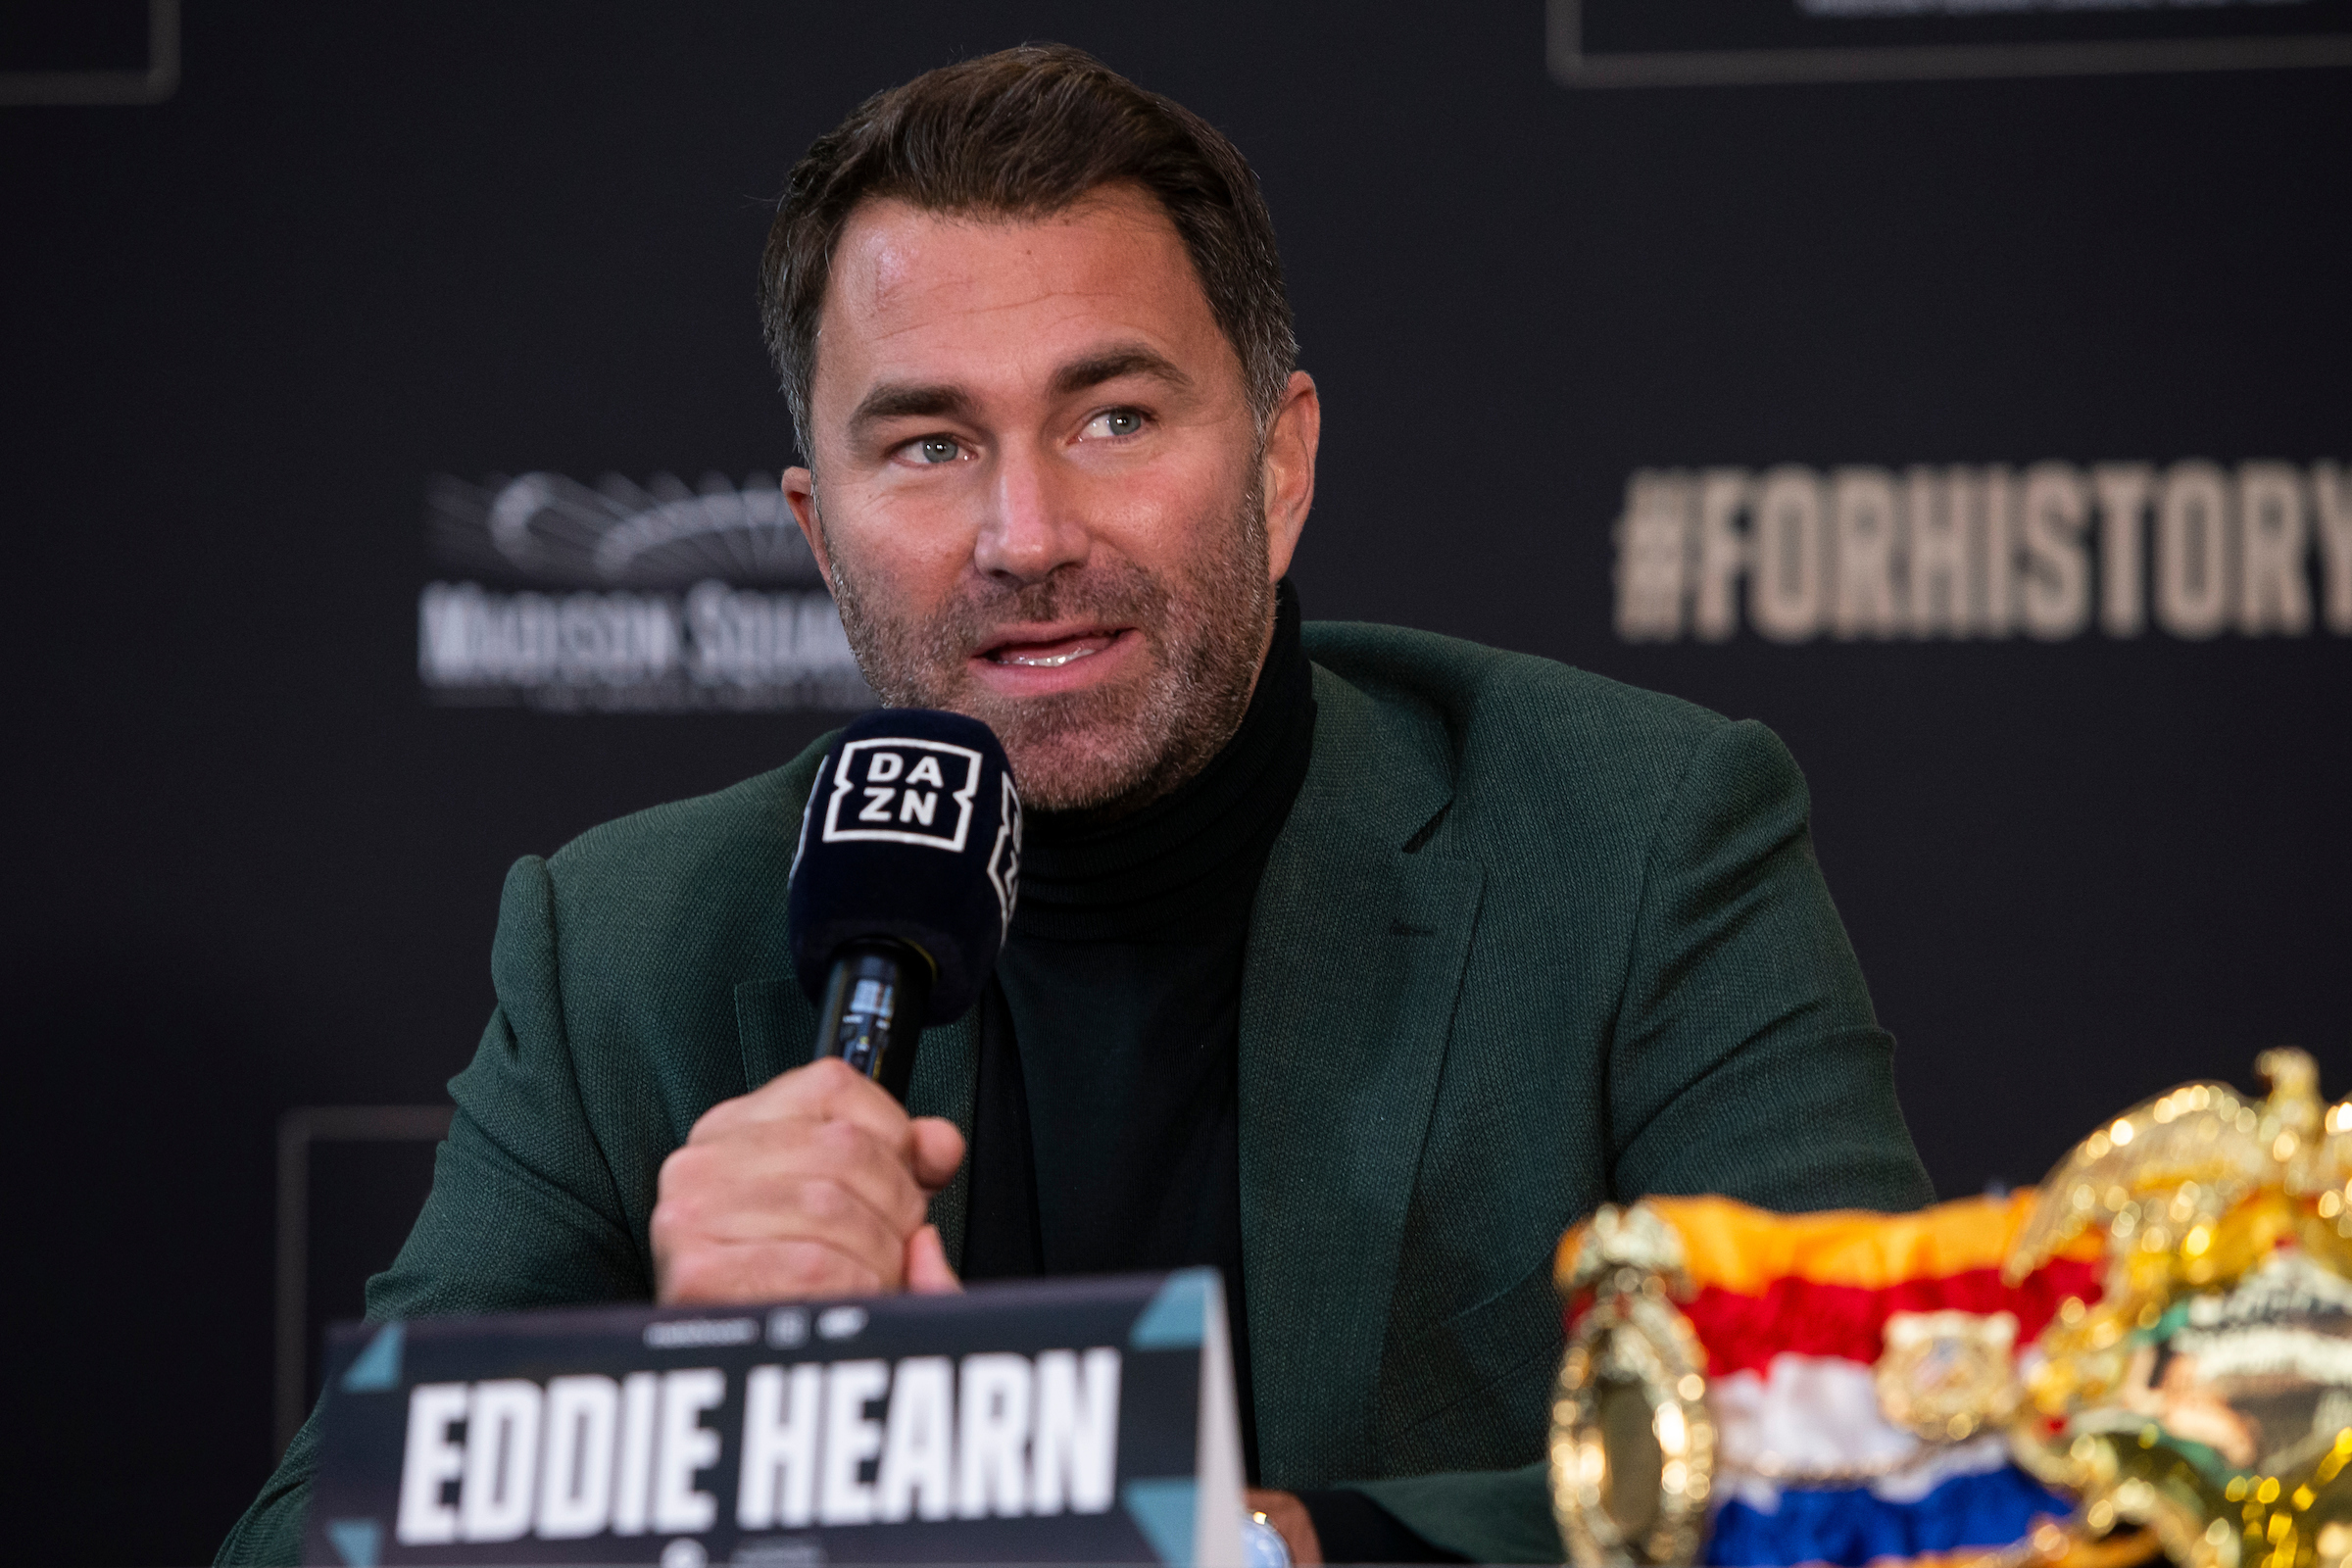 February 2, 2022; New York, NY; Eddie Hearn of Matchroom speaks at the press conference for the upcoming Matchroom Boxing fight card on April 30, 2022 at Madison Square Garden in New York City. Mandatory Credit: Michelle Farsi for Matchroom/MSG Photos